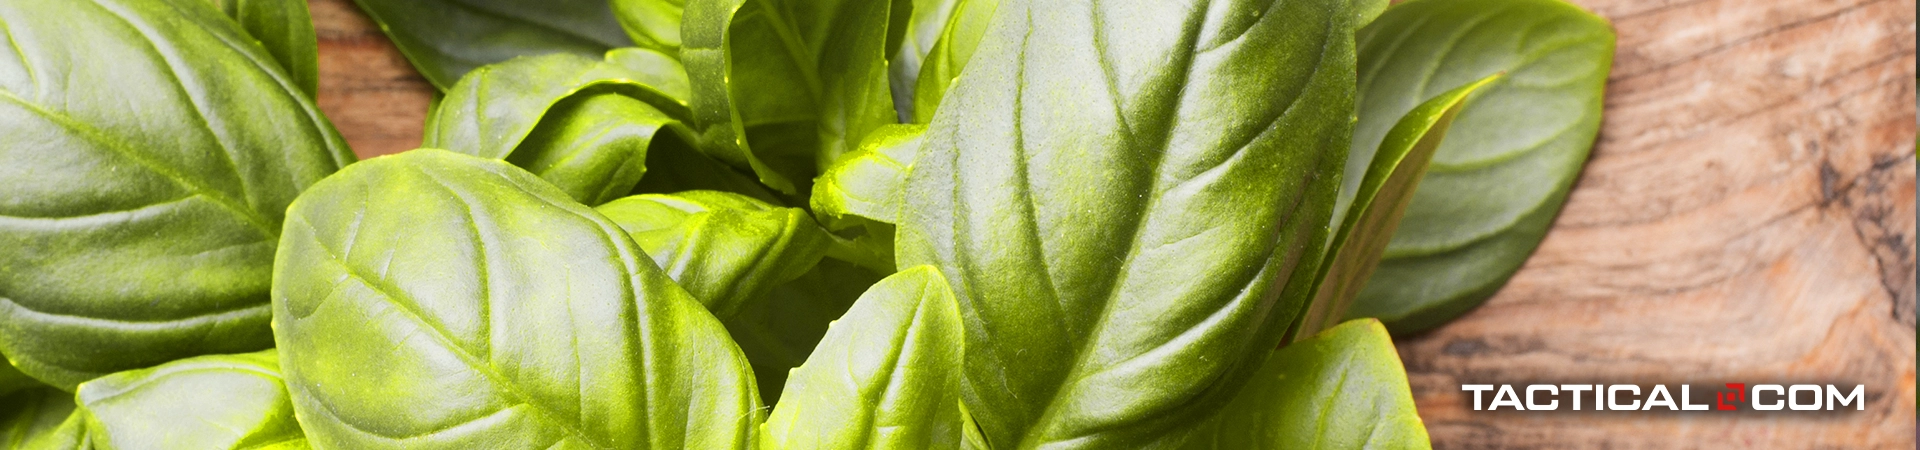 basil is one of the top herbs to grow in your garden